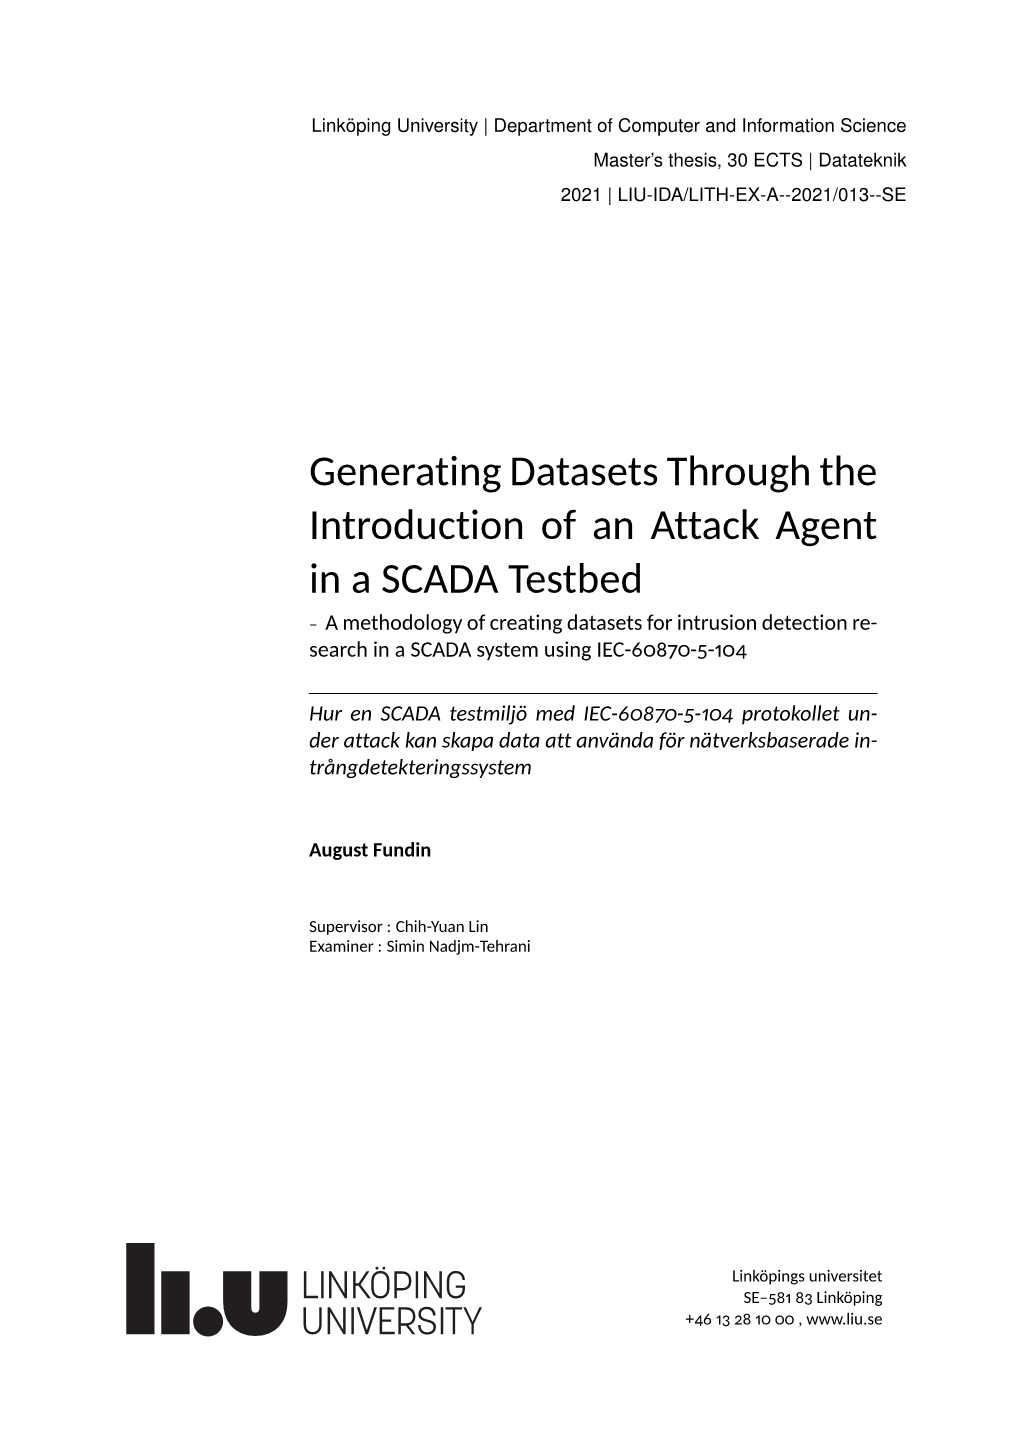 Generating Datasets Through the Introduction of an Attack Agent in A